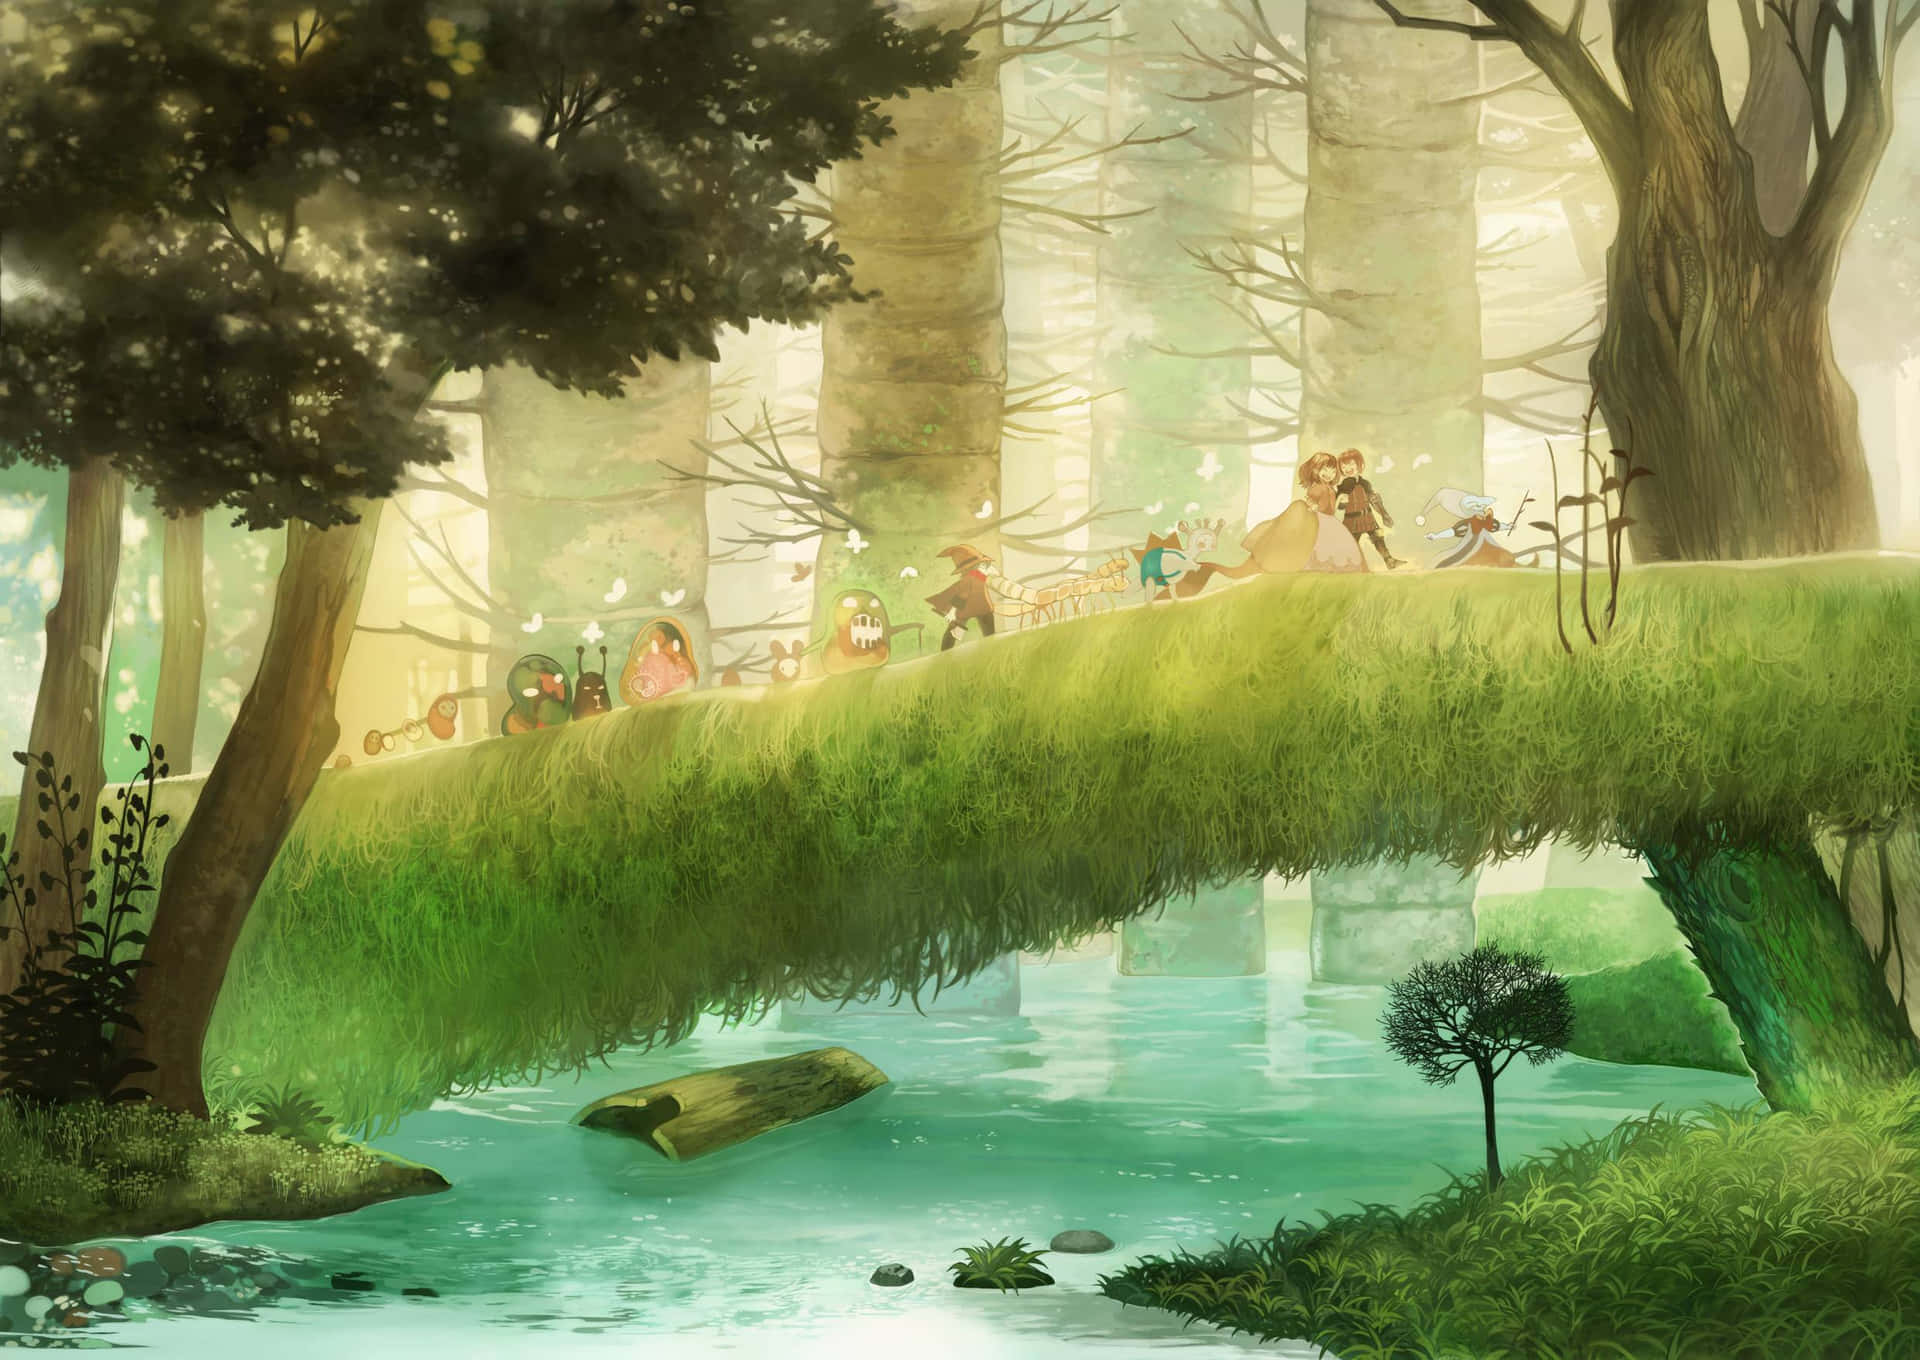 A serene forest glade in Ghibli studio anime style, dappled in the soft,  warm glow of the setting sun - SeaArt AI